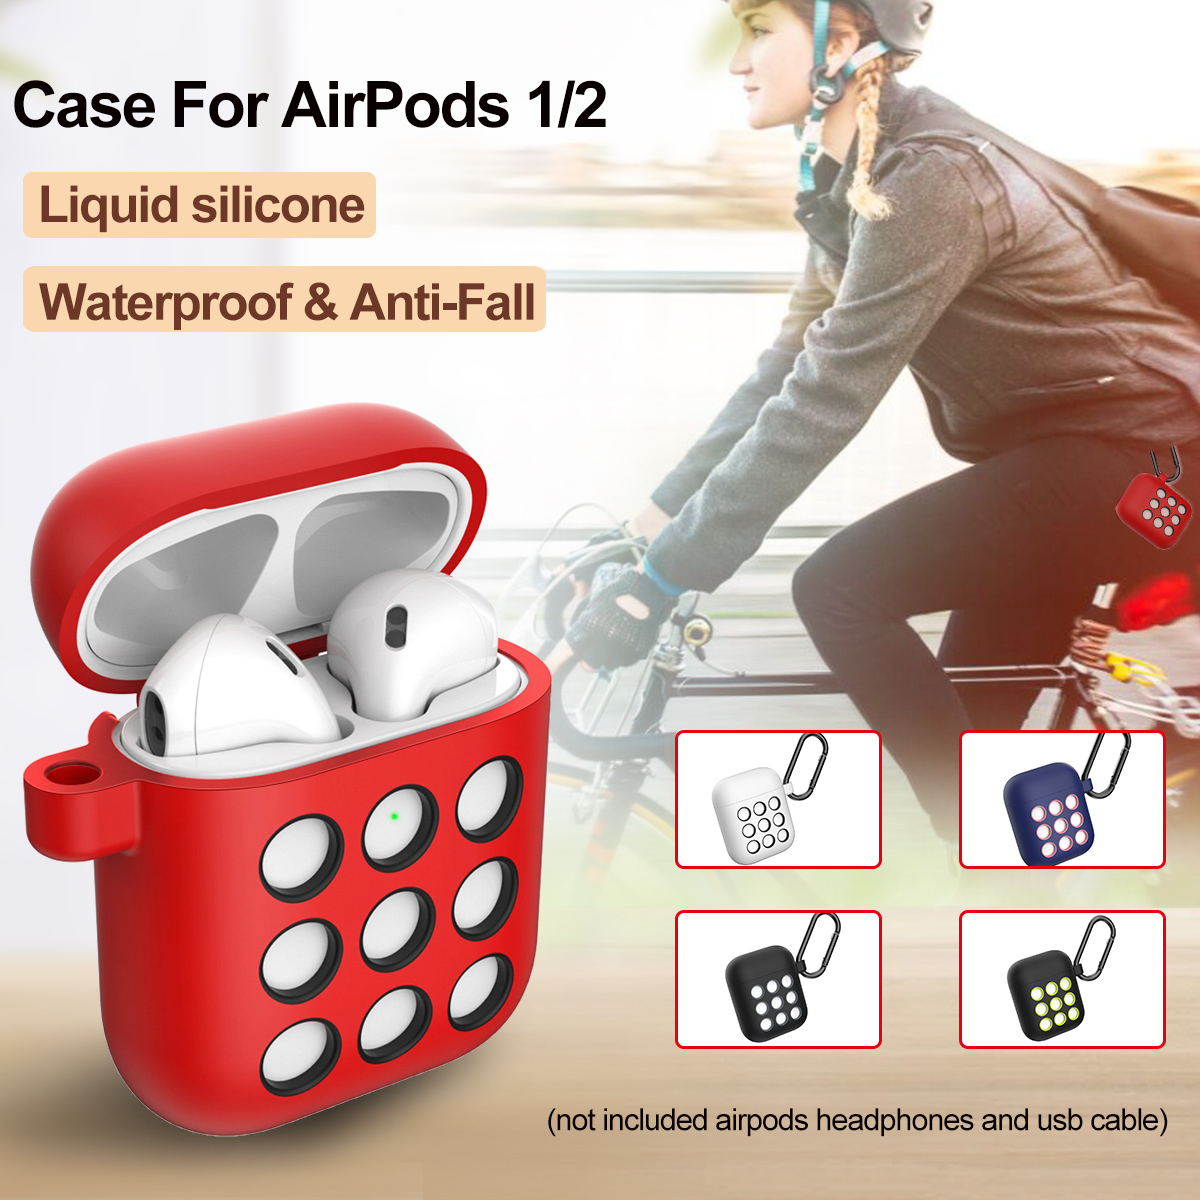 Portable-Liquid-Silicone-Storage-Case-Headphones-Cover-For-Apple-AirPods-12-bluetooth-Earphone-1621230-1